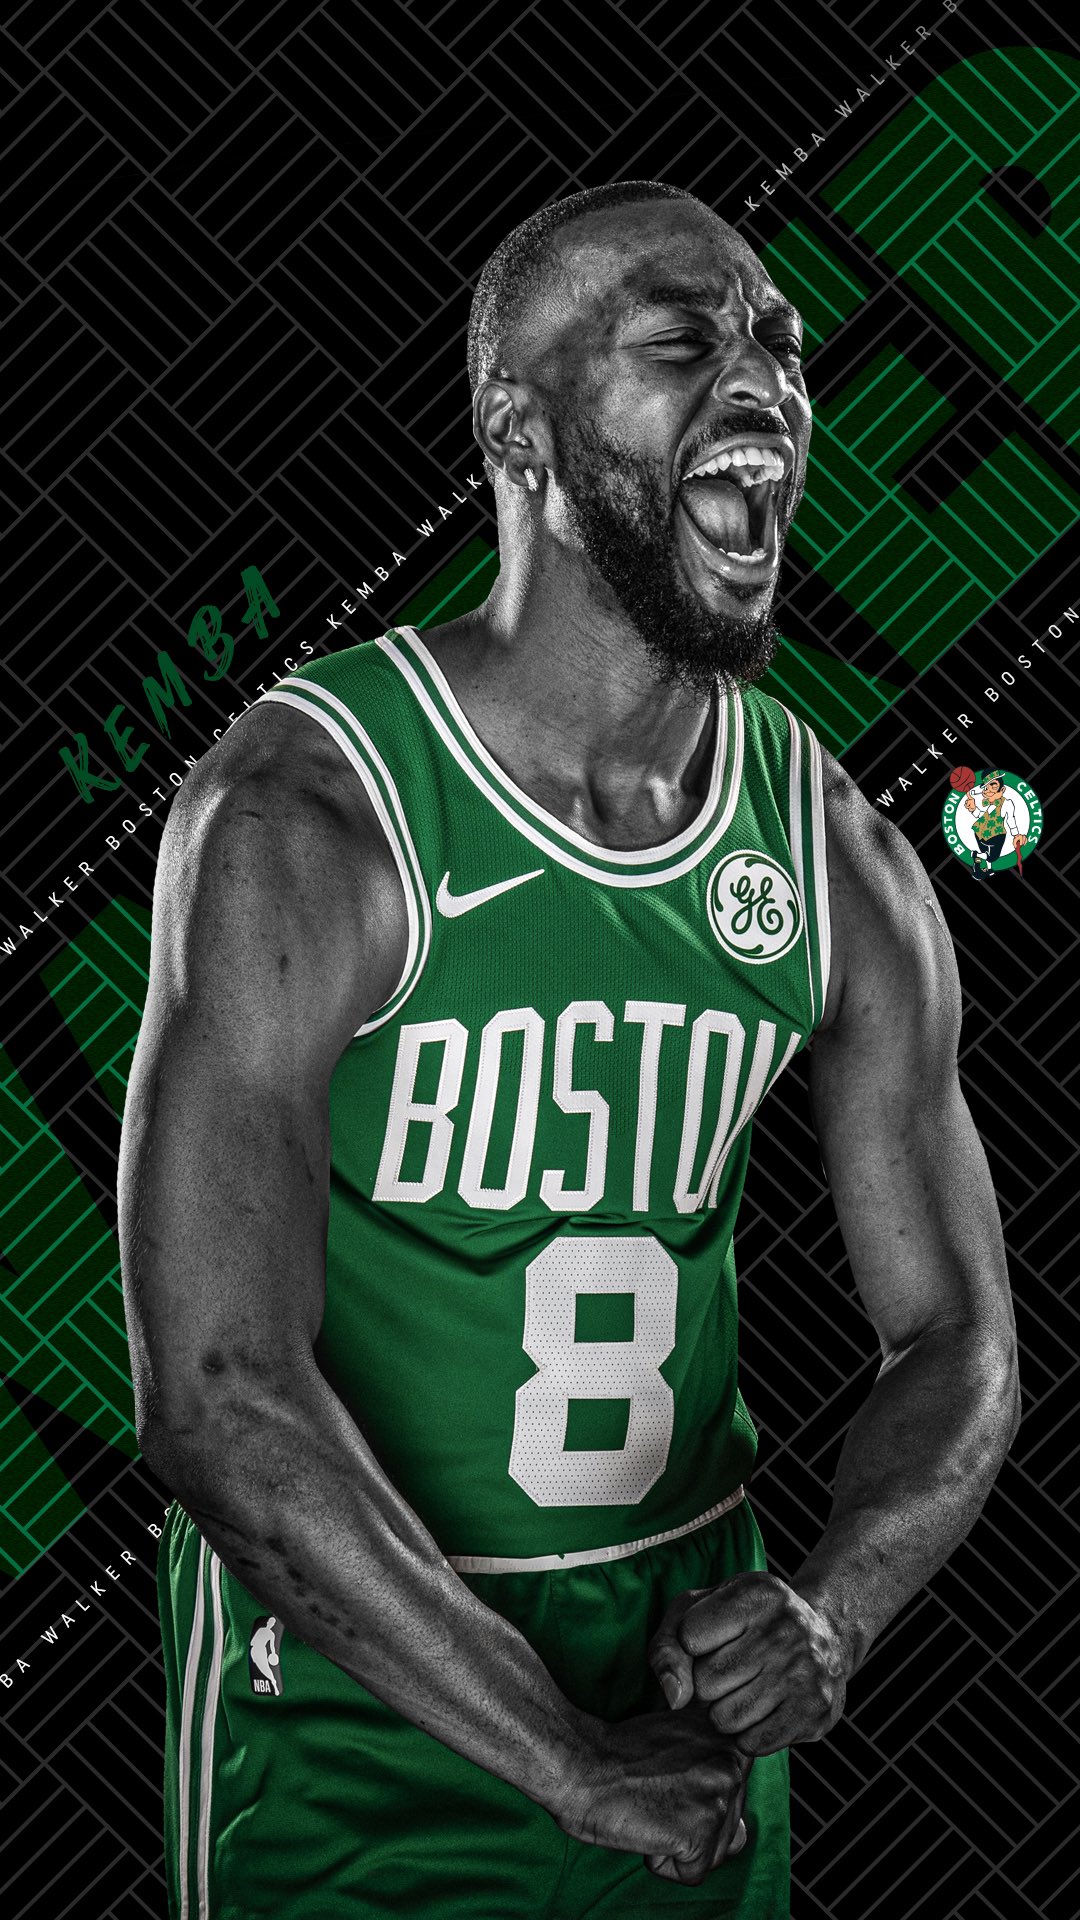 HoopsWallpaperscom  Get the latest HD and mobile NBA wallpapers today  Boston Celtics Archives  HoopsWallpaperscom  Get the latest HD and mobile  NBA wallpapers today